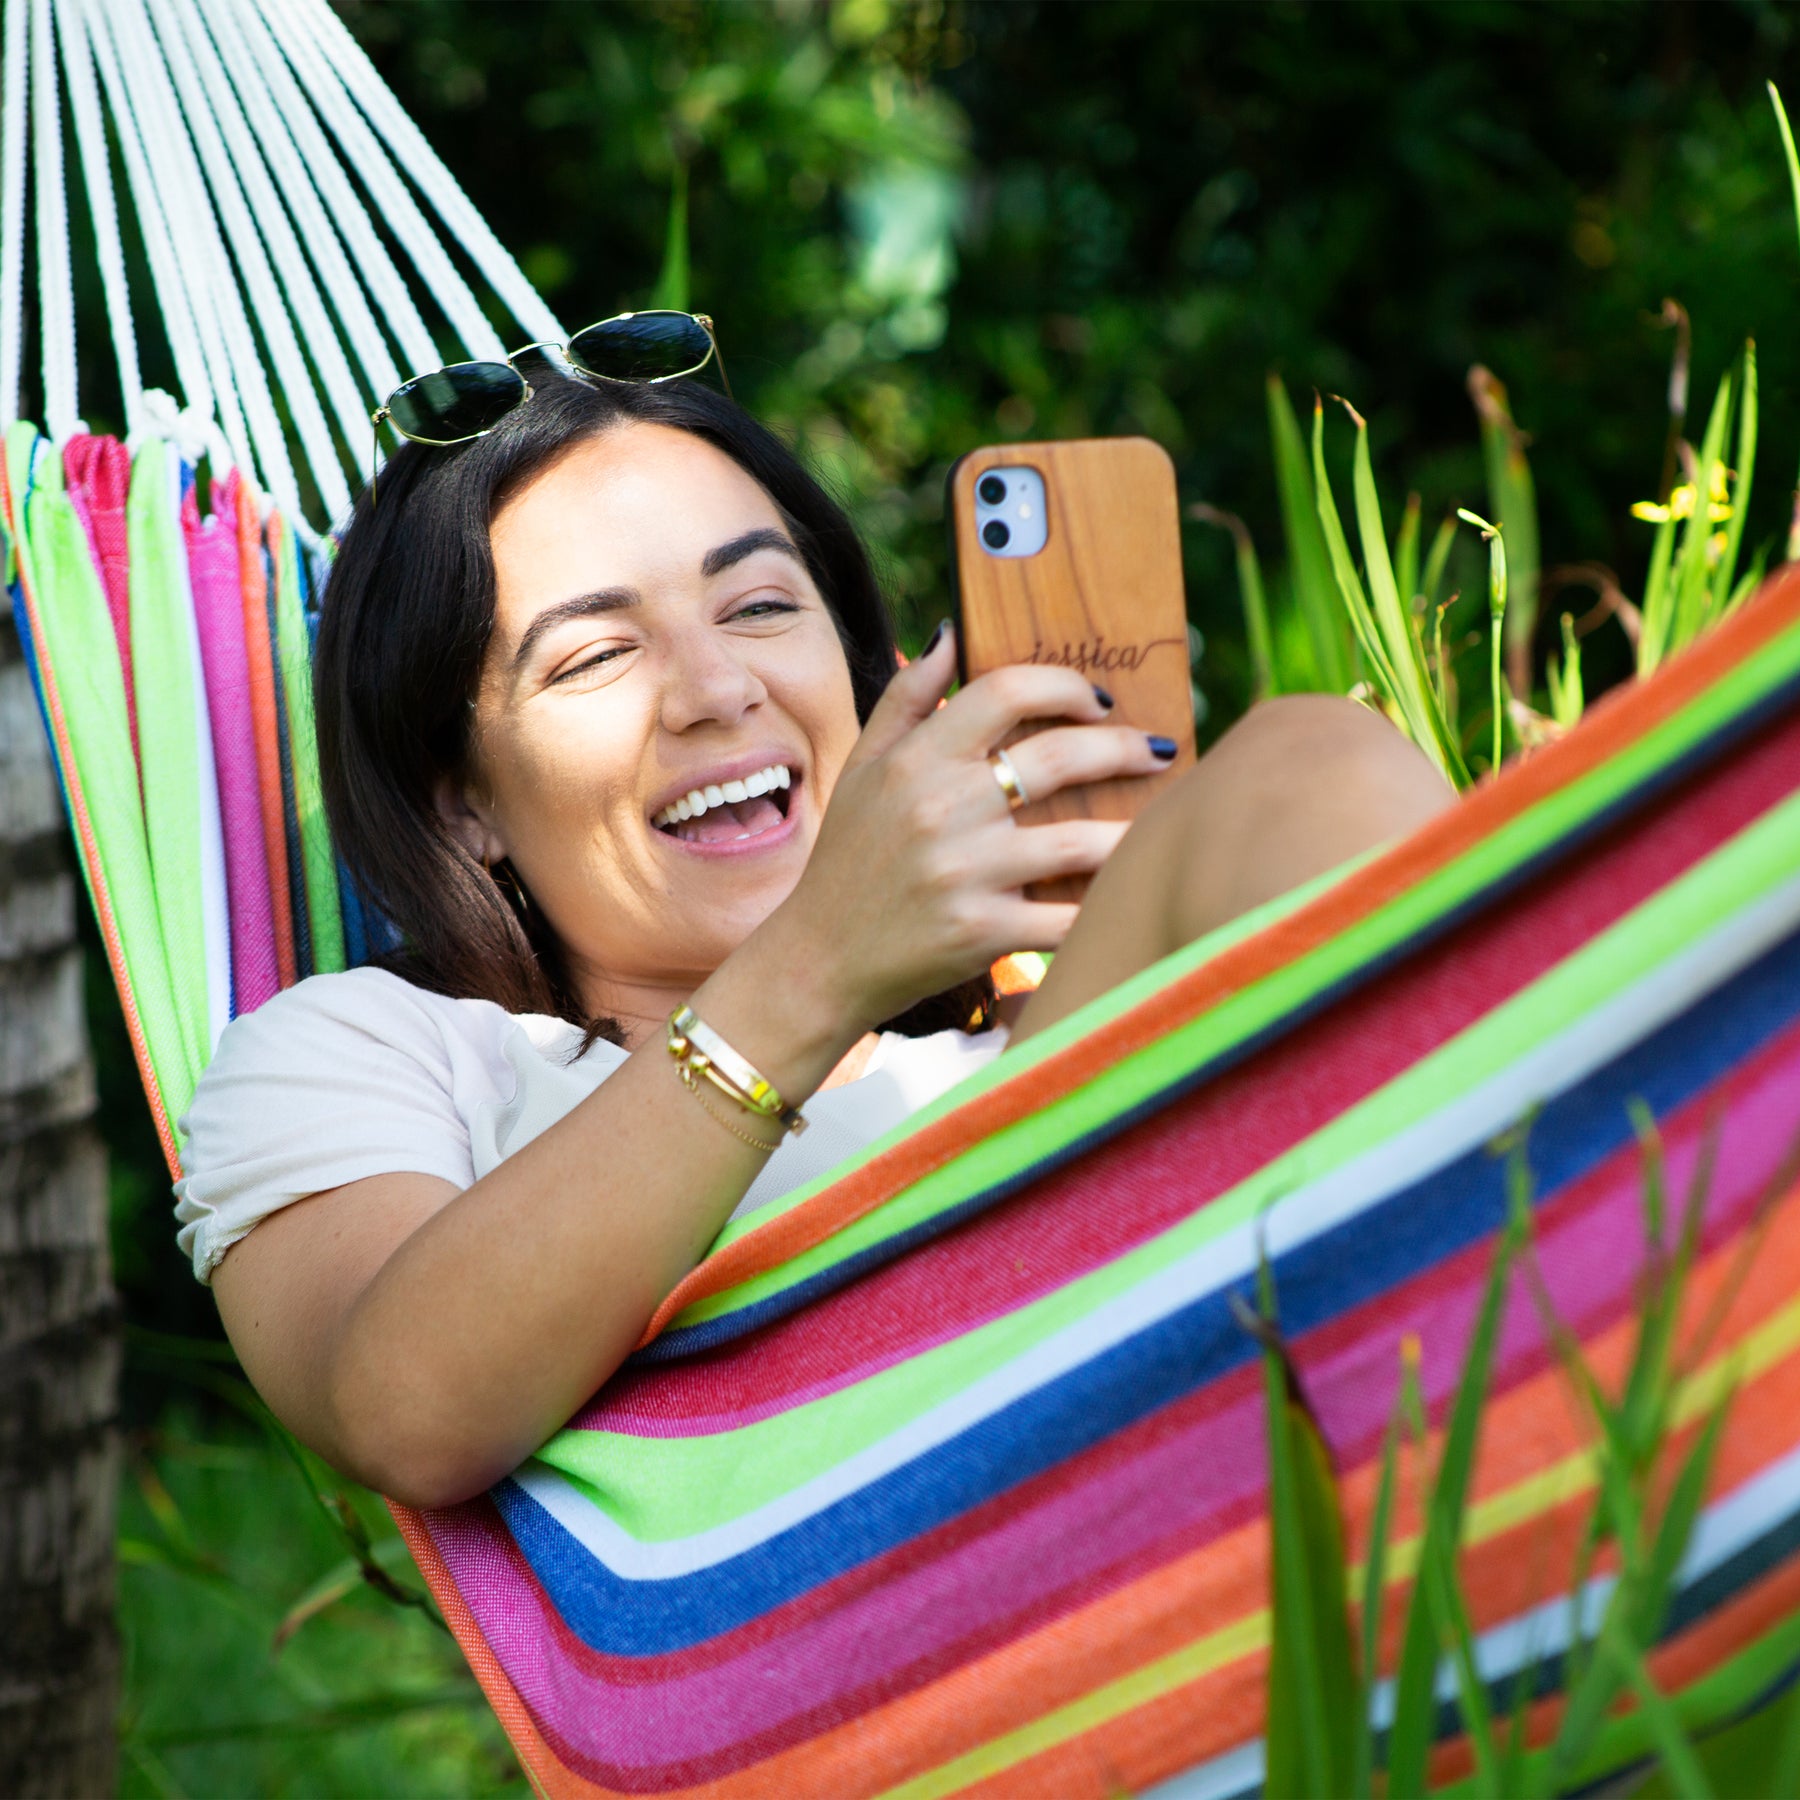 Woman smiling at her cellphone while relaxing in a Bliss Hammocks 40-inch Wide Hammock outside.